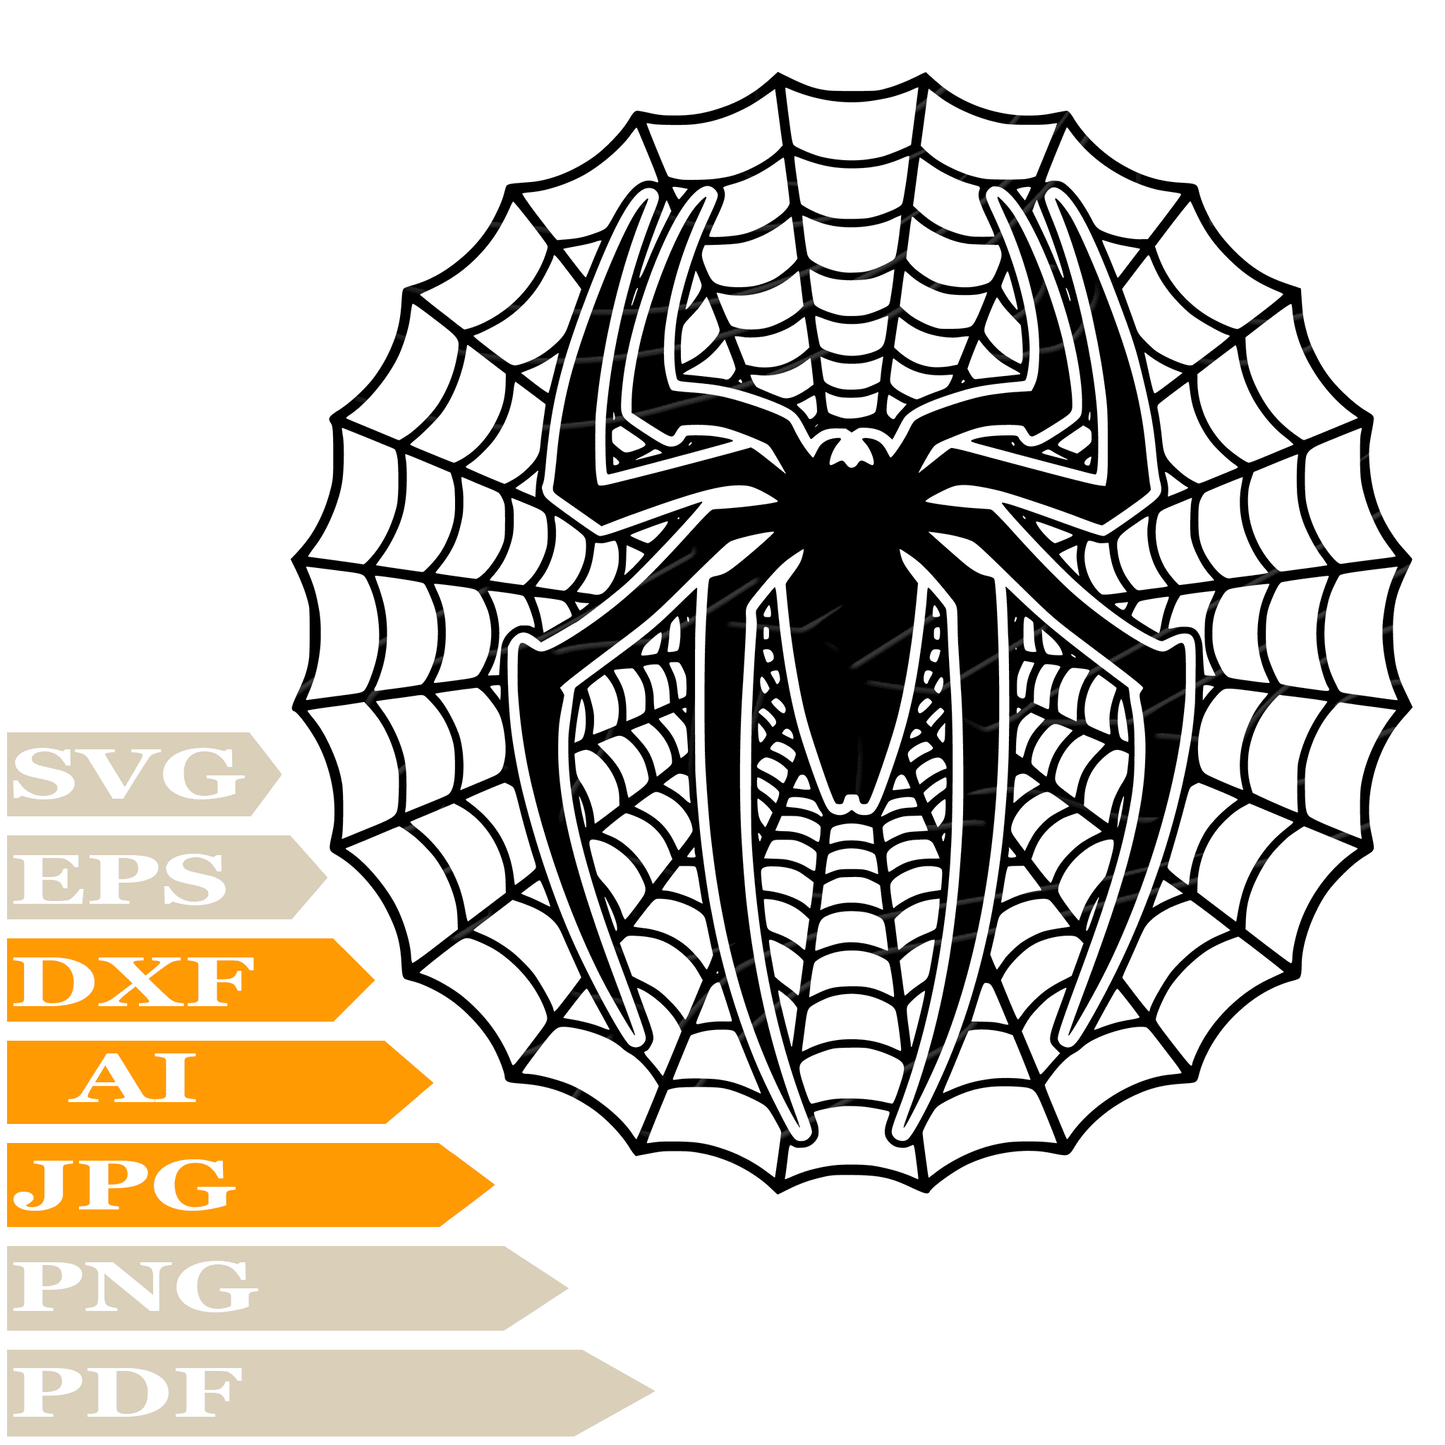 Spider SVG File, Spiderman Logo Vector Graphics, Cobweb SVG For Cricut, Spider PNG, Clipart, Cut File, Instant Download, For Tattoo, Silhouette